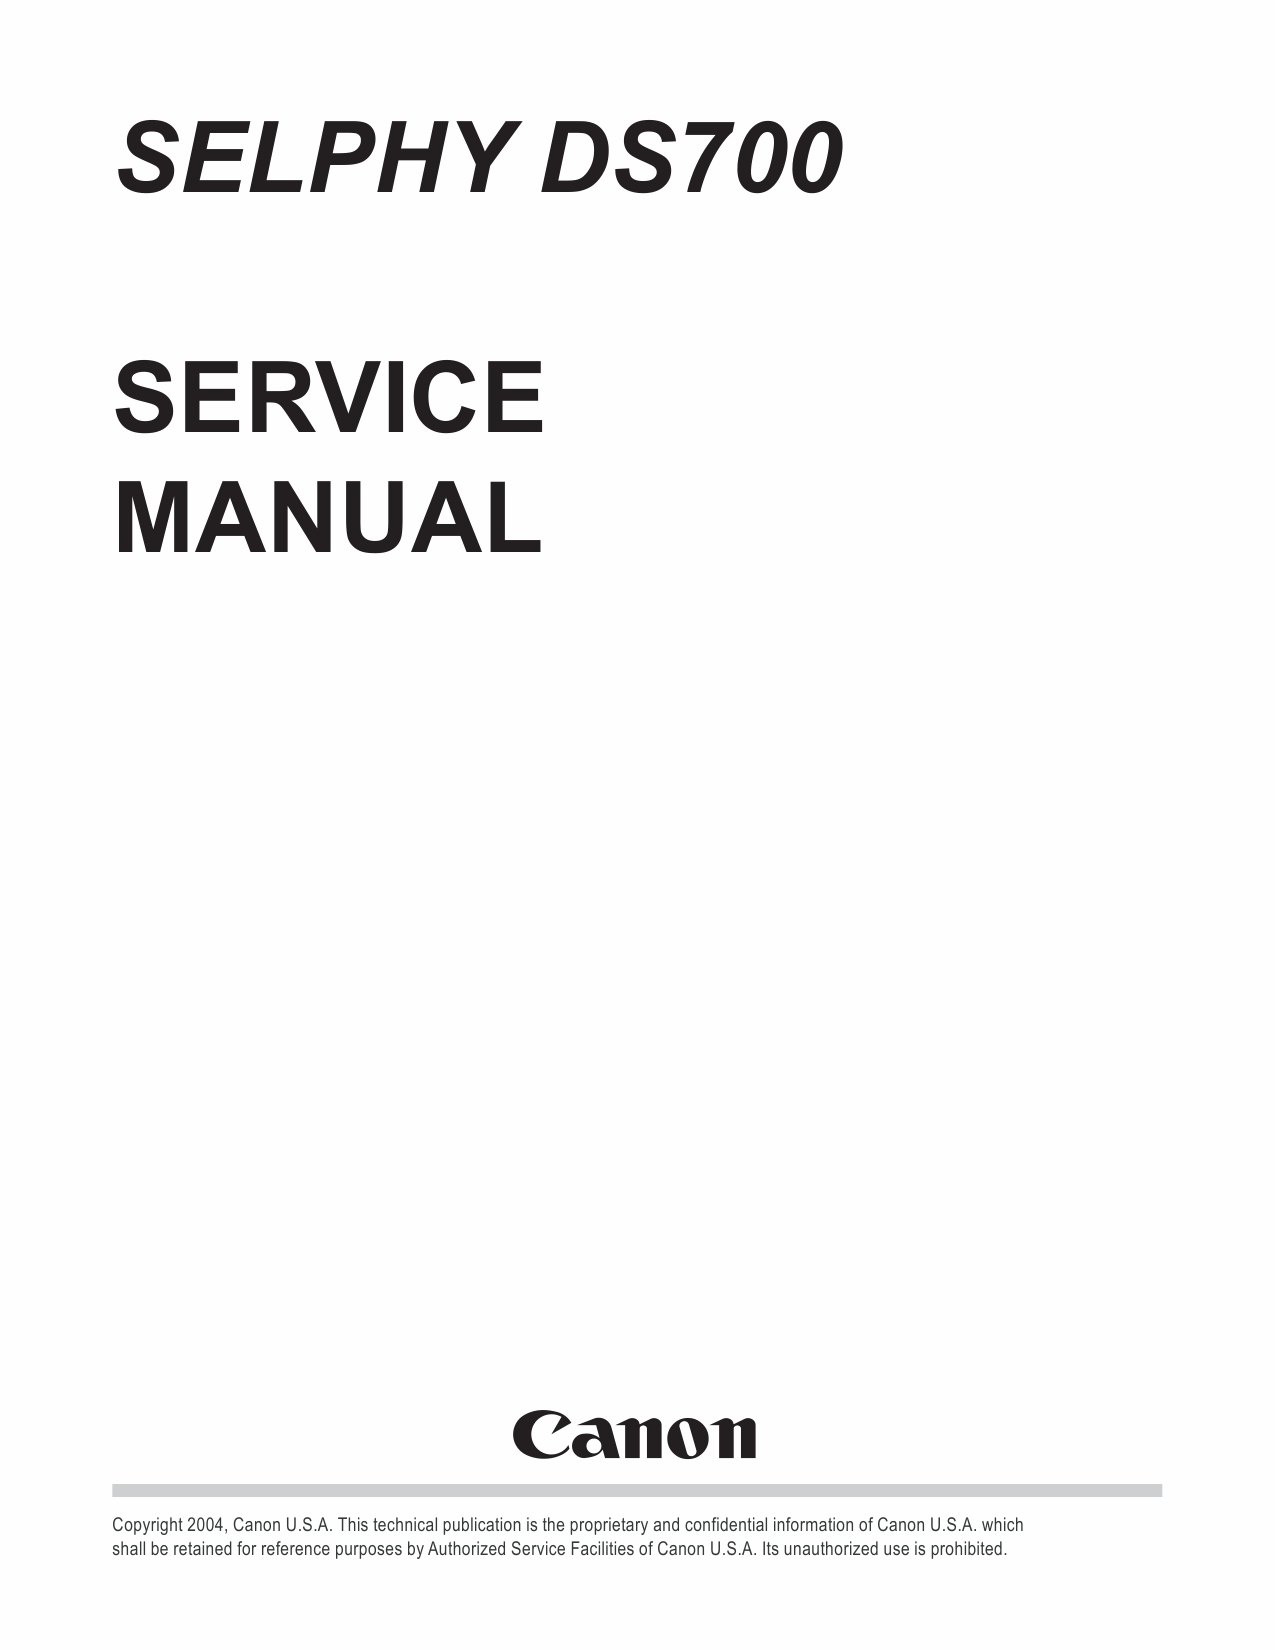 Canon SELPHY DS700 Service and Parts Manual-1